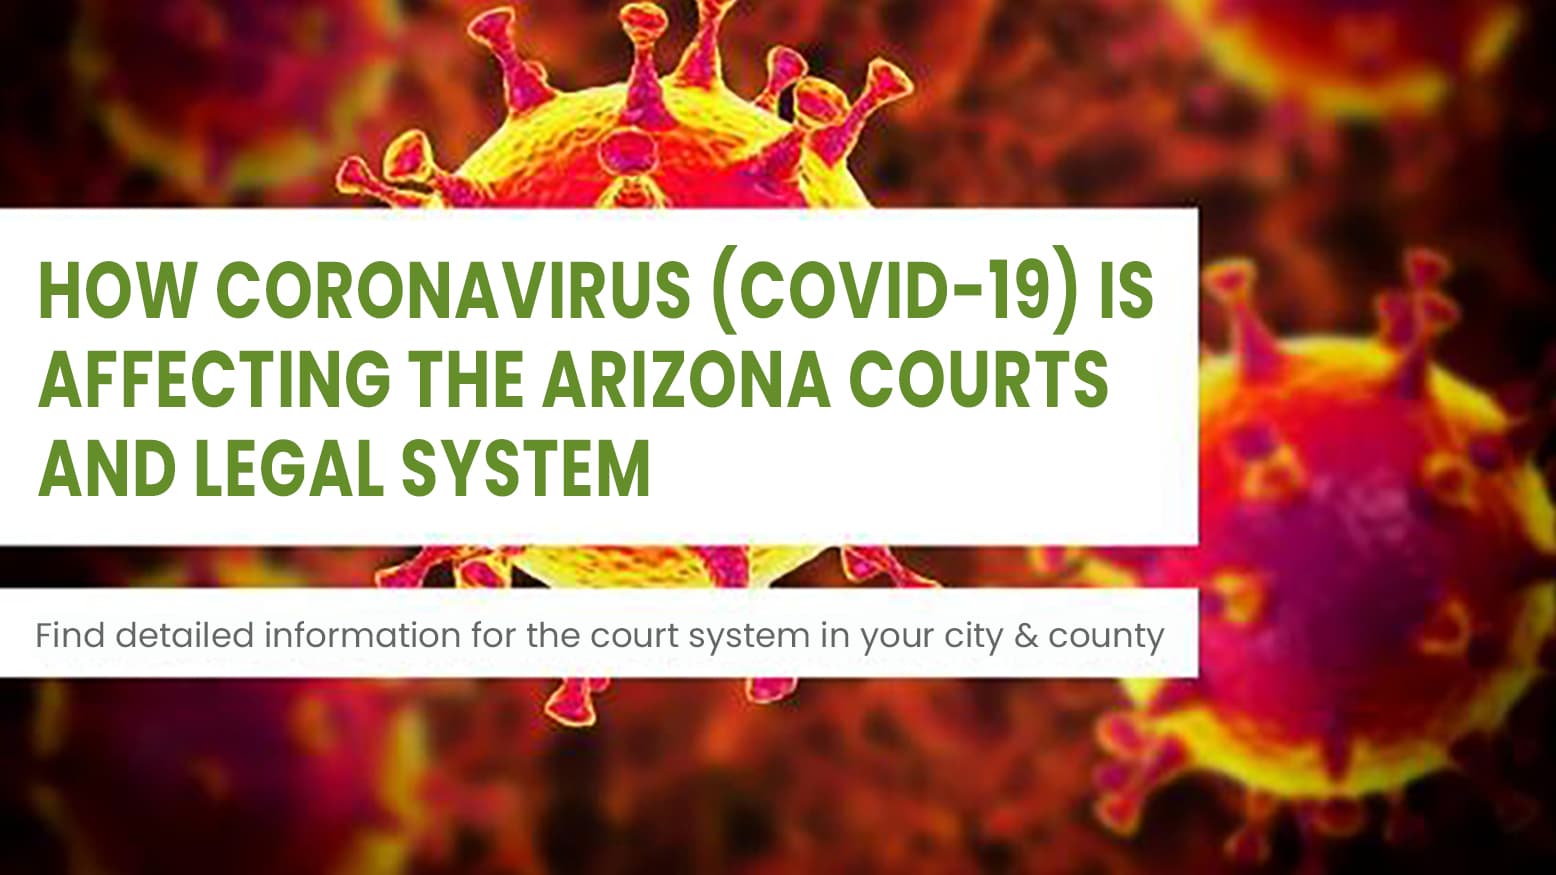 image contains text, how coronavirus (COVID-19) is affecting the Arizona courts and legal system